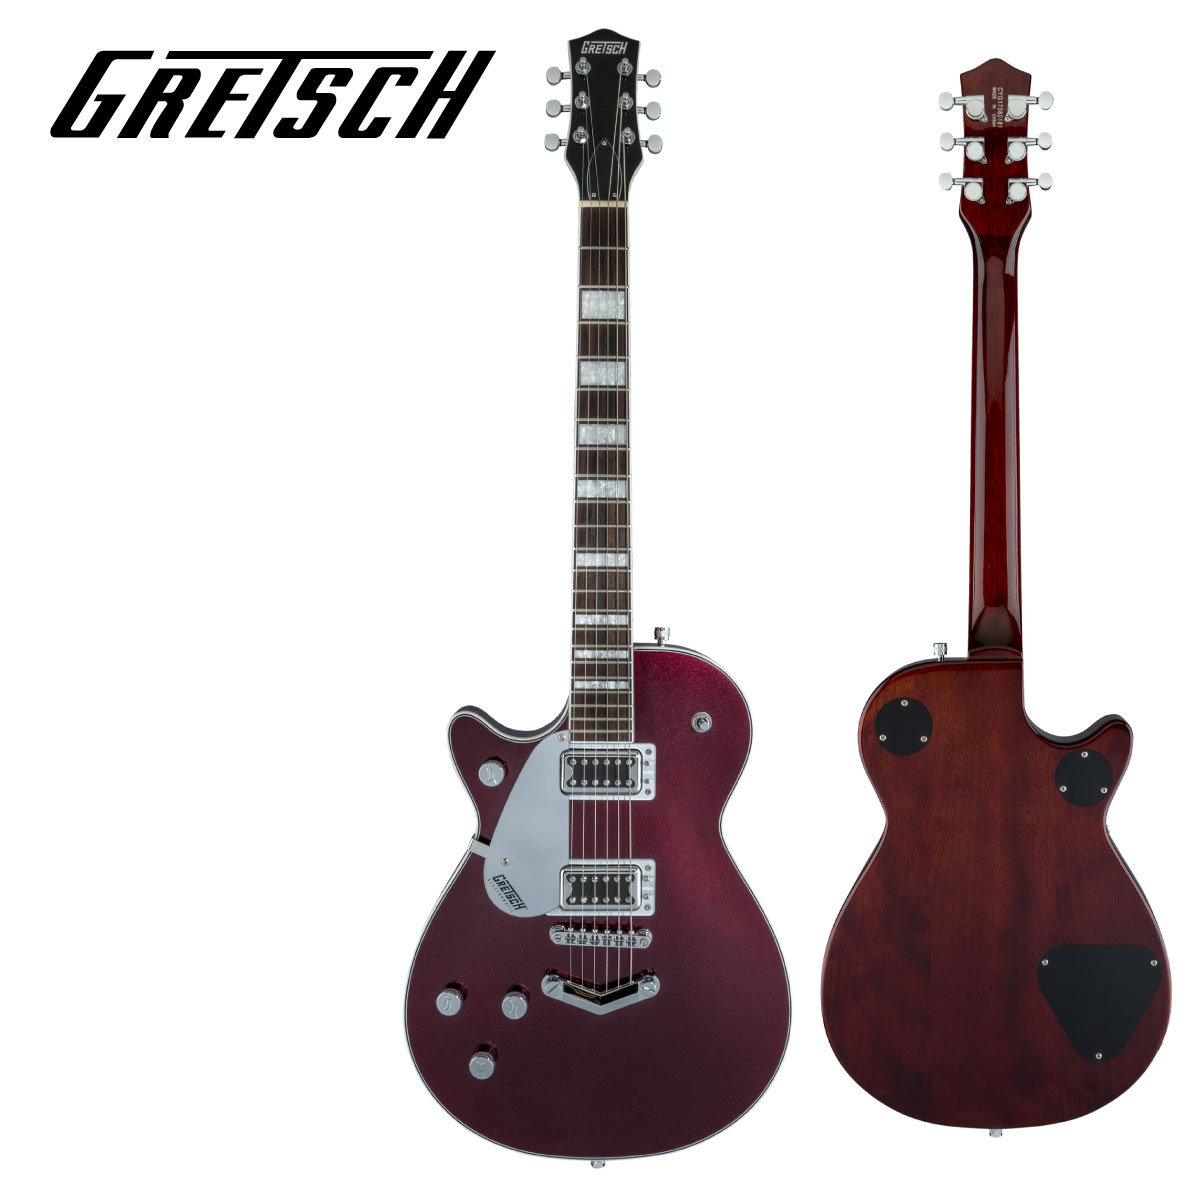 Gretsch G5220LH Electromatic Jet BT Single-Cut with V-Stoptail Left-Handed  -Dark Cherry Metallic-  新品[グレッチ][エレクトロマチック][ジェット][Red,レッド,チェリー,赤][Lefty,レフティ